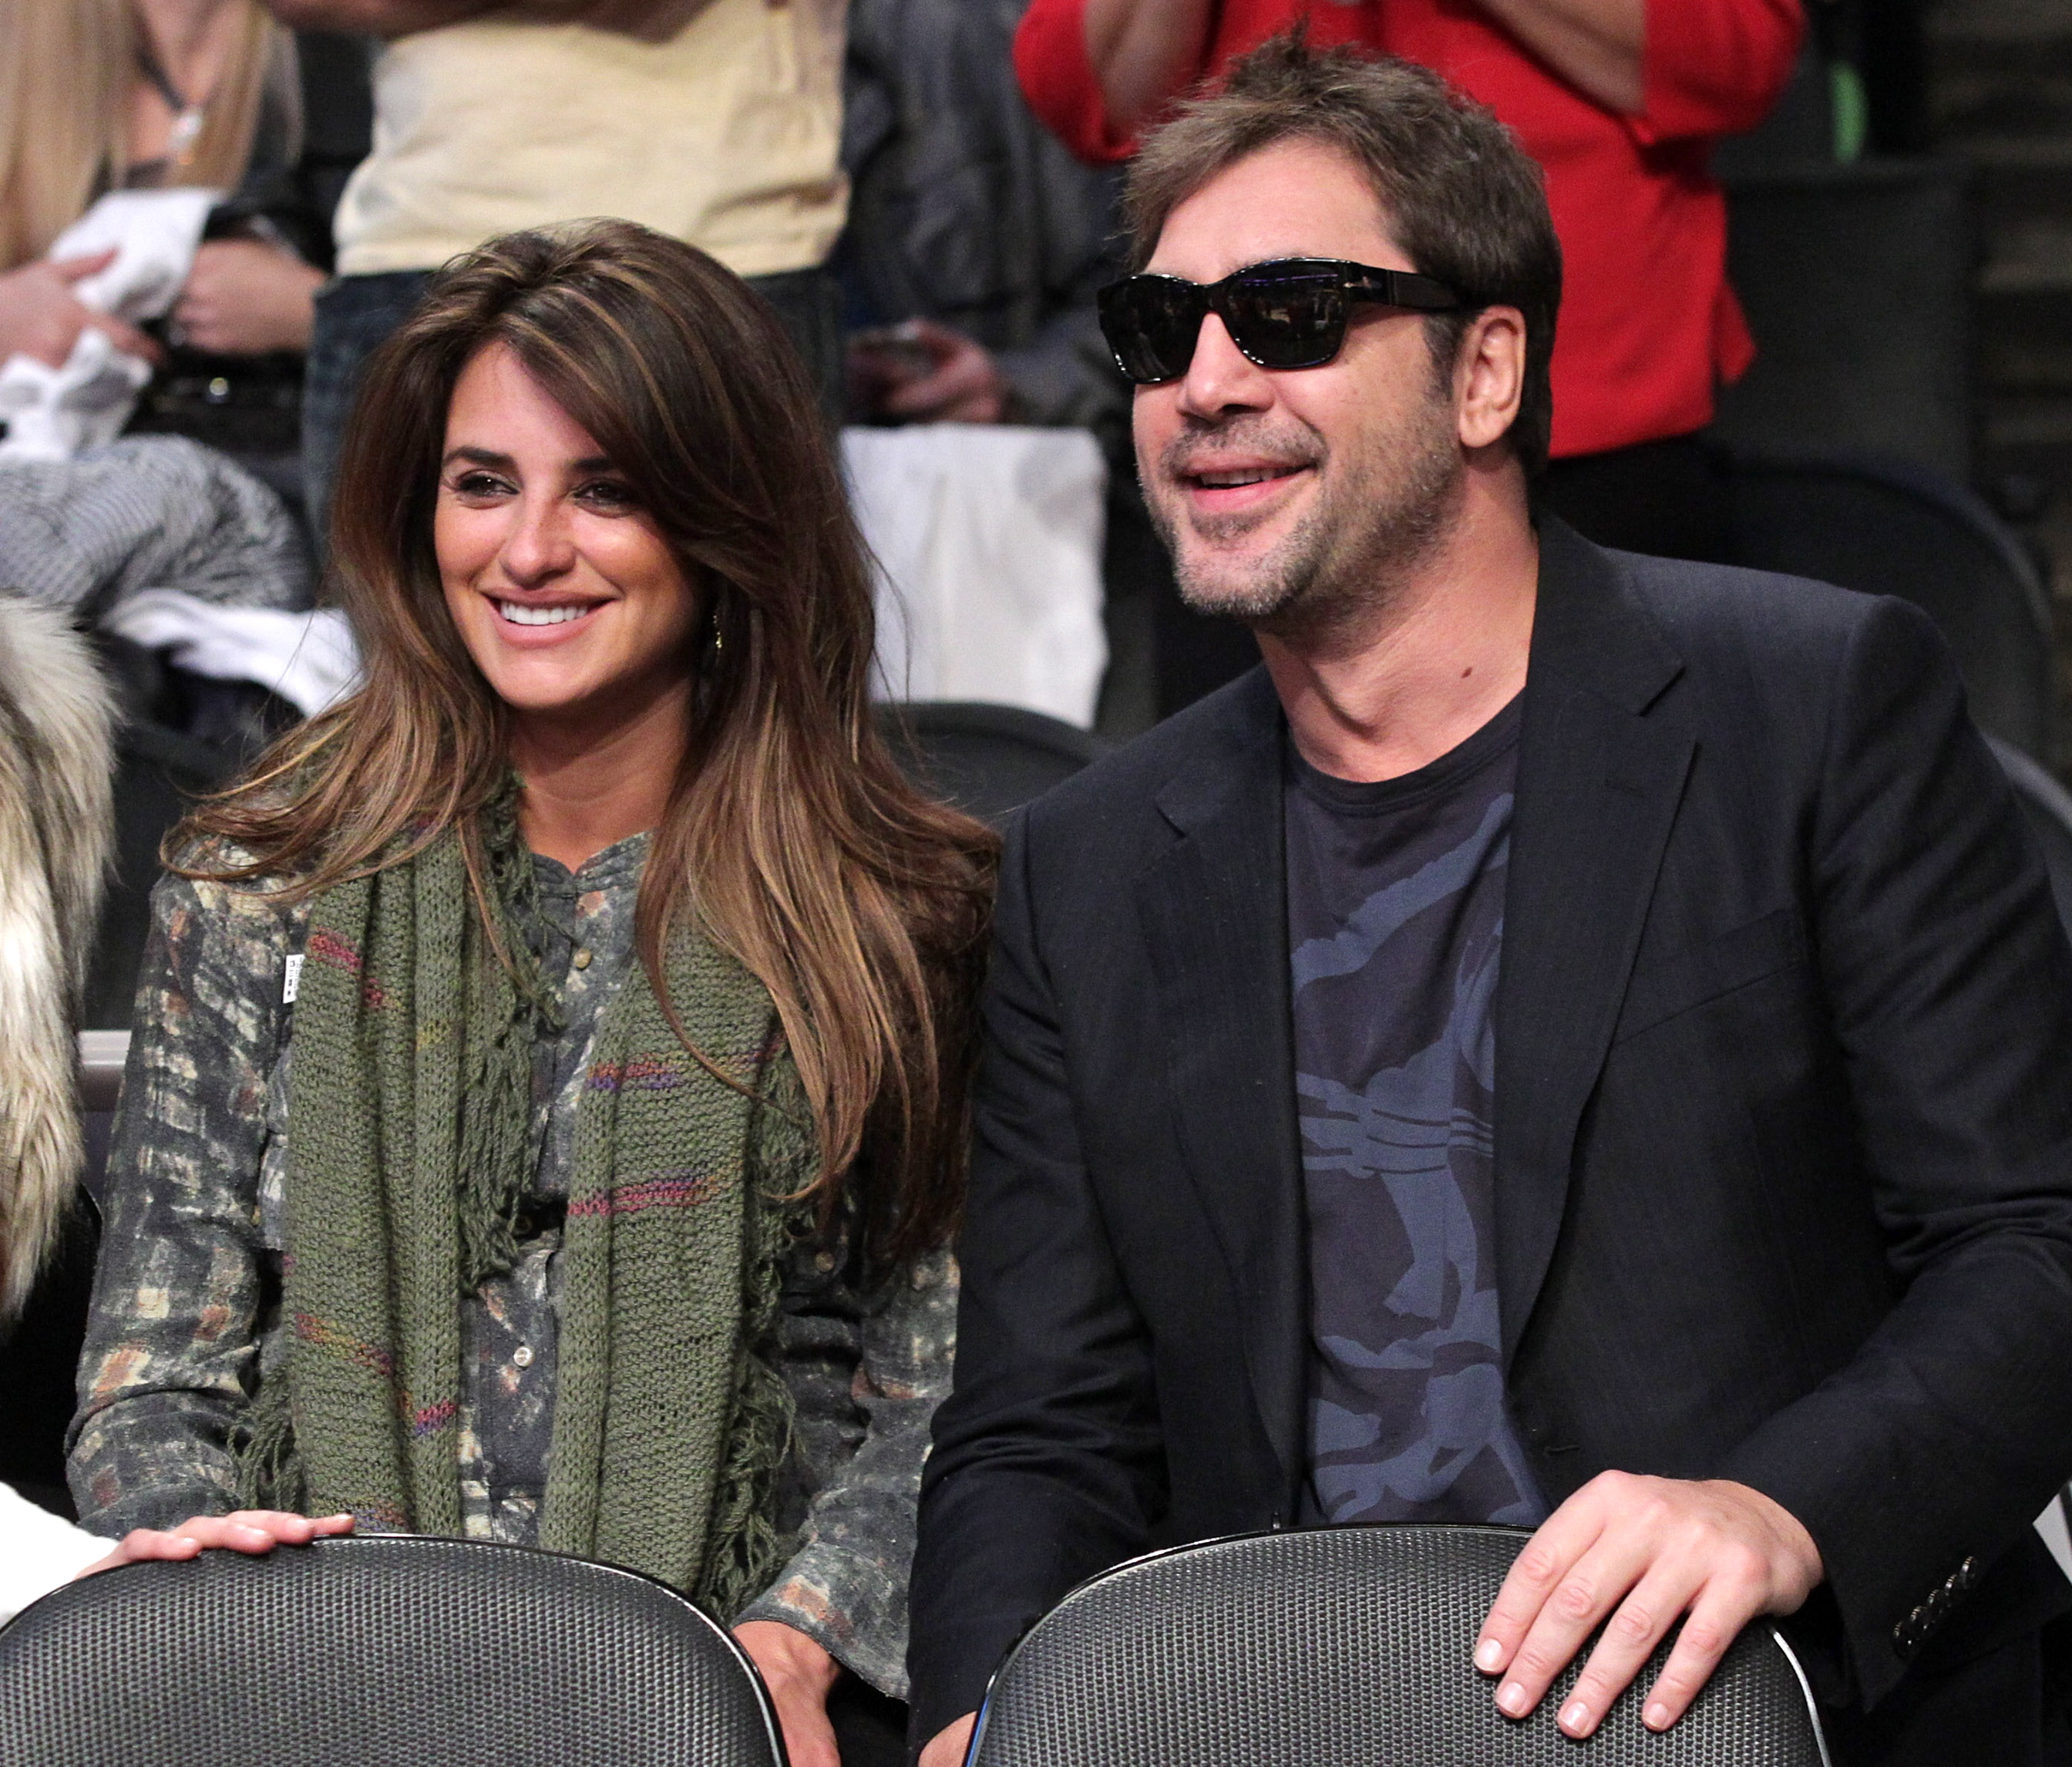 Penelope Cruz and Javier Bardem at the Miami Heat vs. Los Angeles Lakers game, Staples Center, December 25, 2010, Los Angeles, California | Source: Getty Images